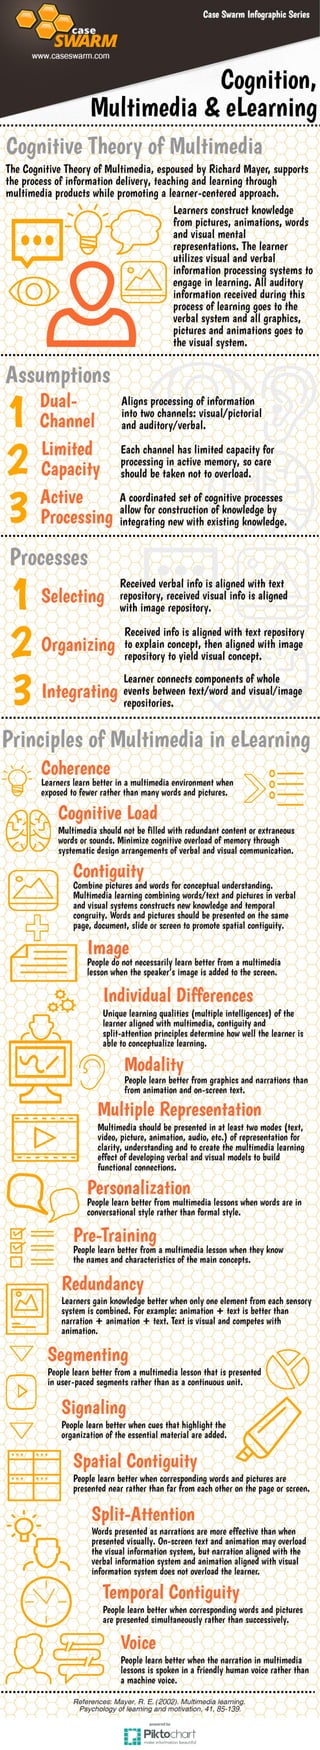 Infographic: Cognition, Multimedia & eLearning